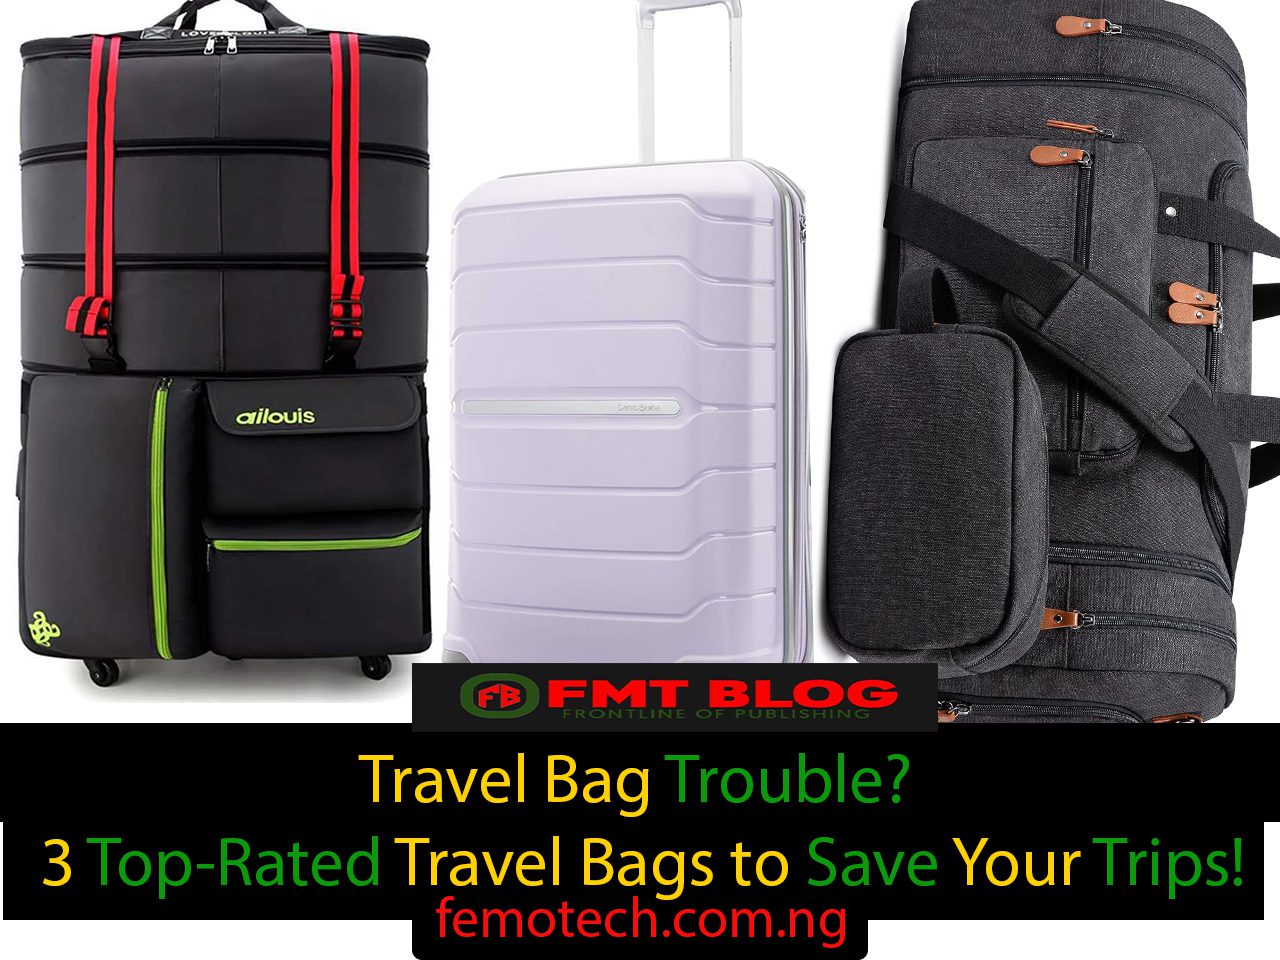 Travel Bag Trouble? 3 Top-Rated Travel Bags to Save Your Trips!